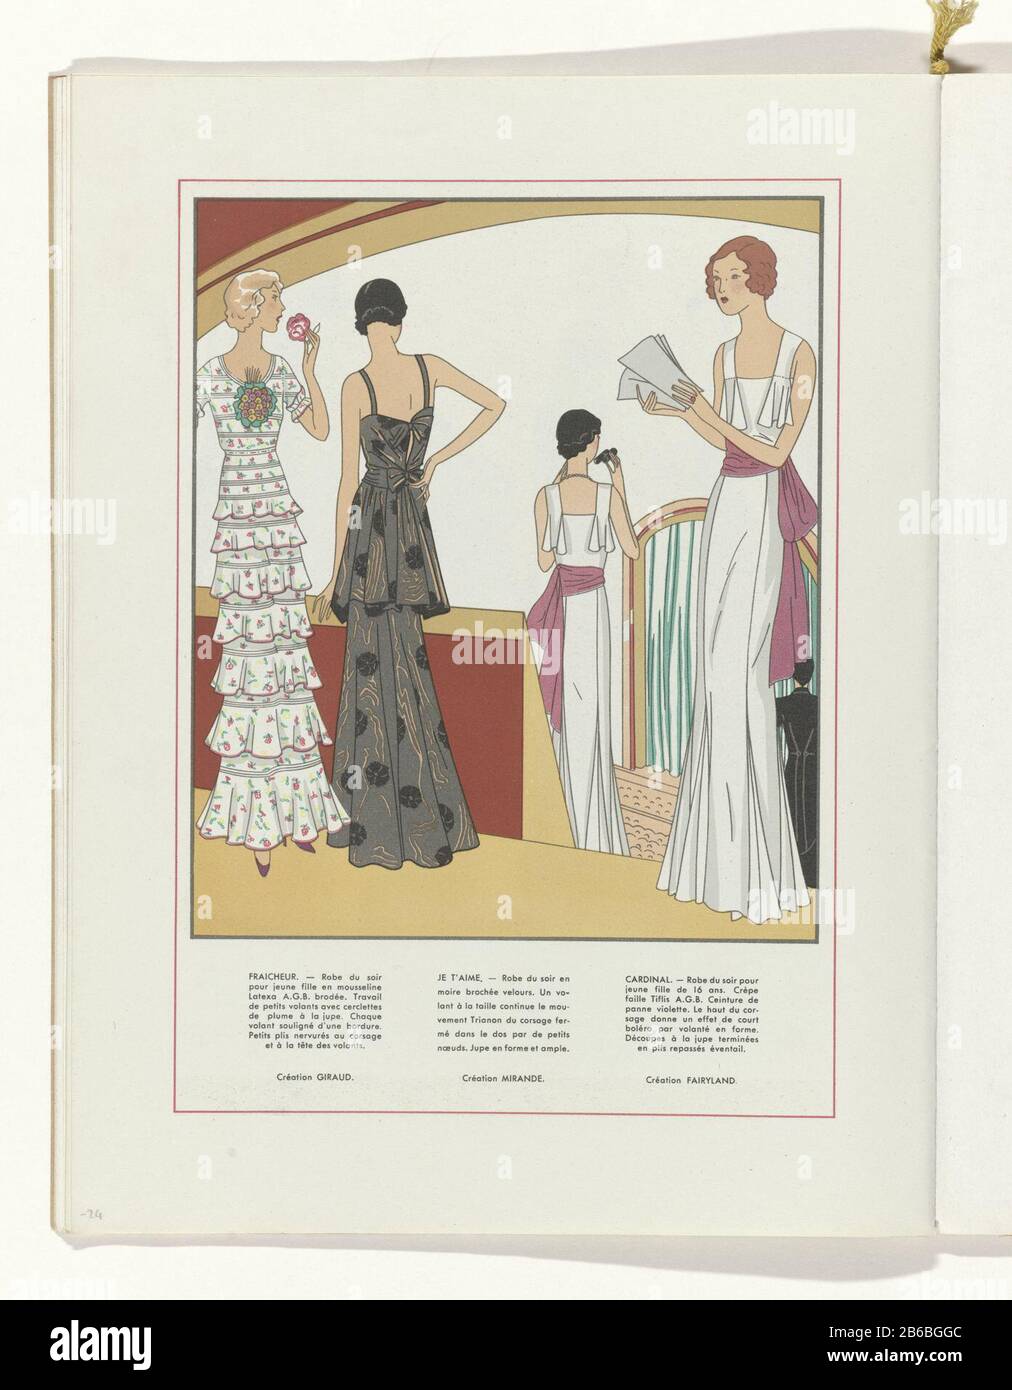 Left: evening gown, embroidered 'muslin Latexa A.G.B. "Giraud. Middle:  Evening of "moire" brocaded velvet, Mirande. Right: white evening dress  with a purple belt, suitable for a 16 year old, of Fairyland. Page